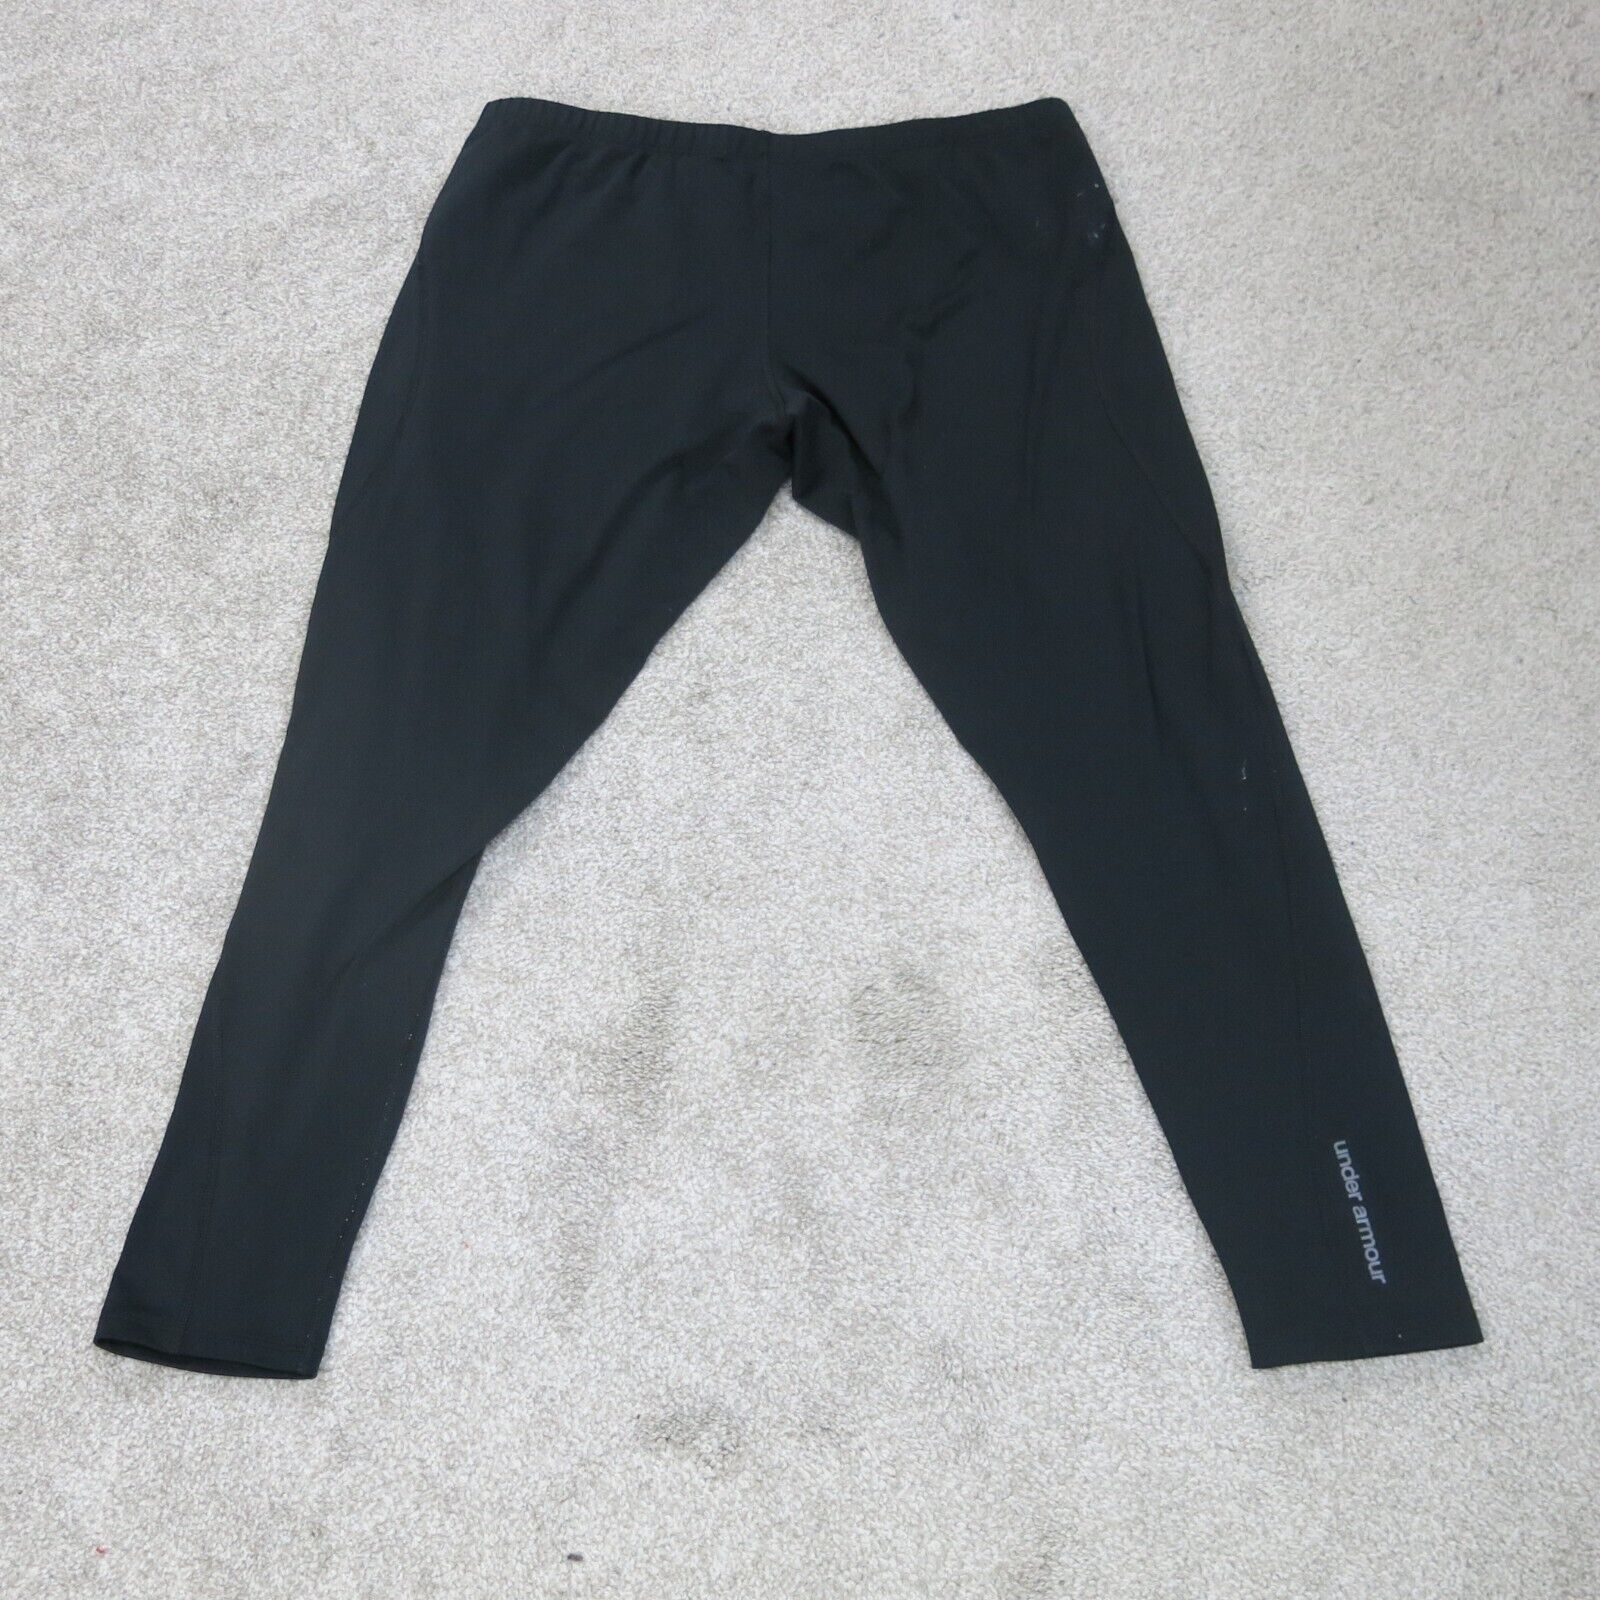 Under Armour Pants Womens Large Black Fitted Activewear Ankle Running